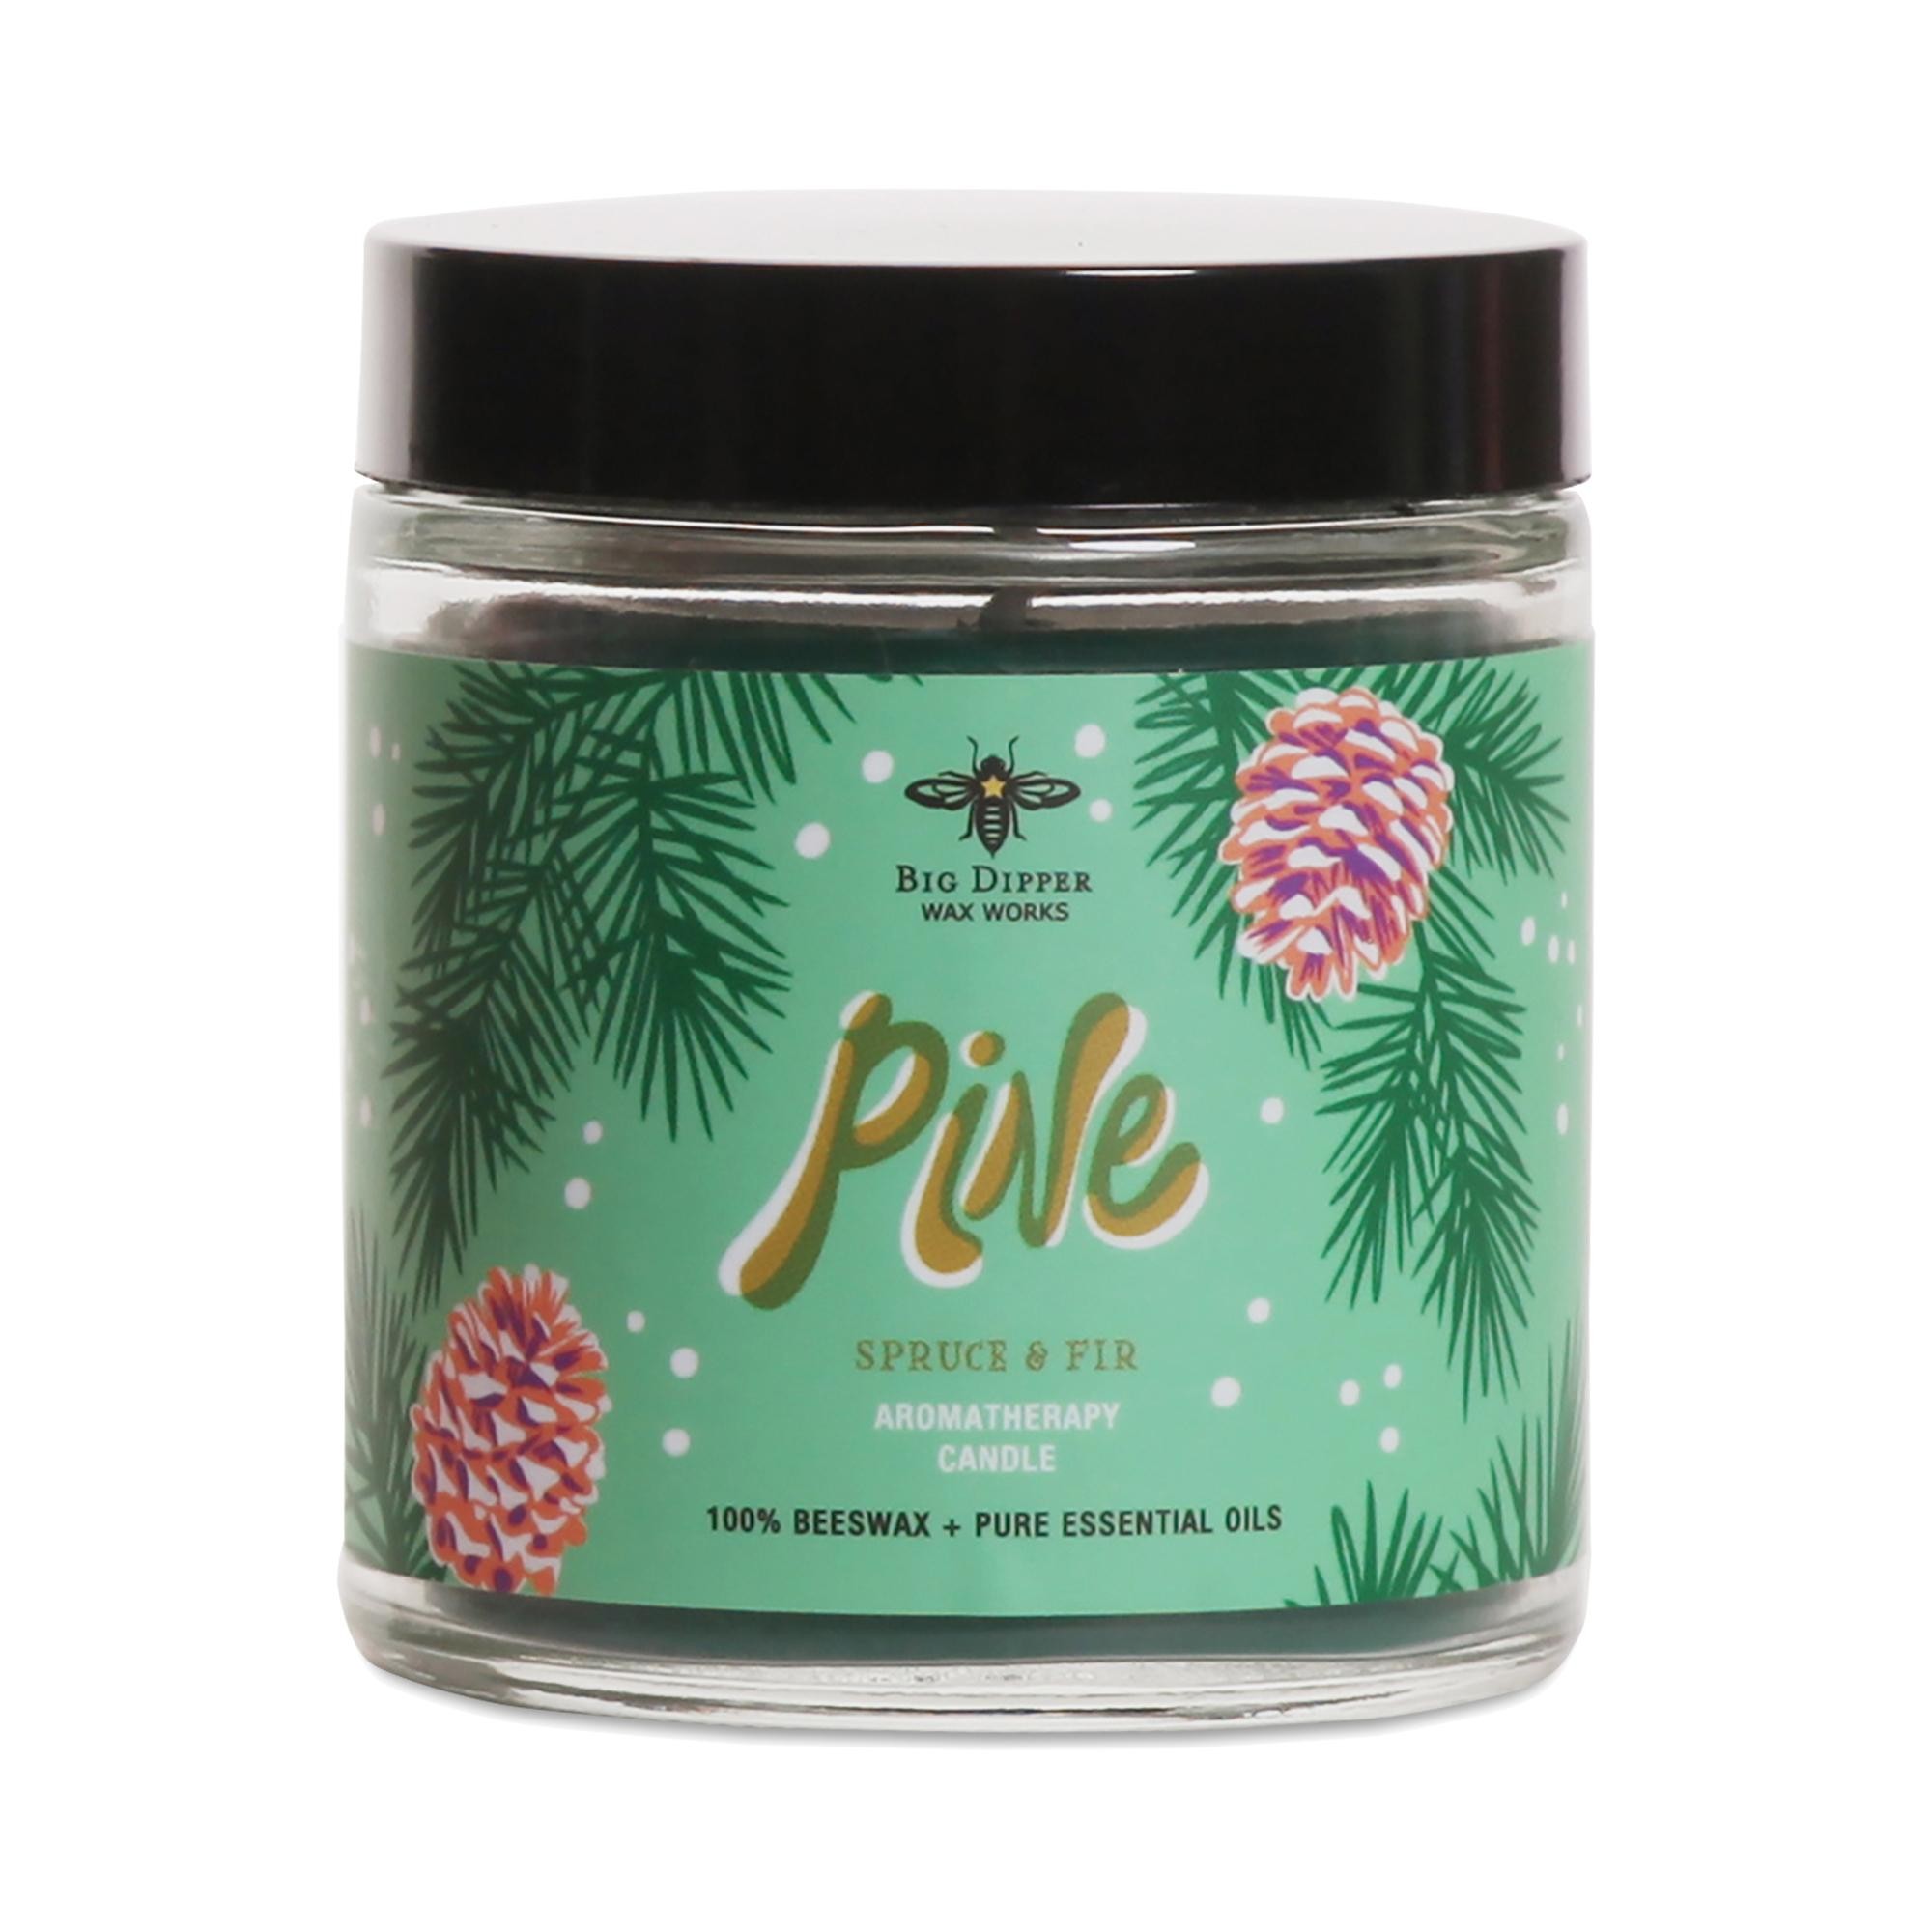 Big Dipper Wax Works Holiday Apothecary Candle, Pine 3.2 Oz Candle